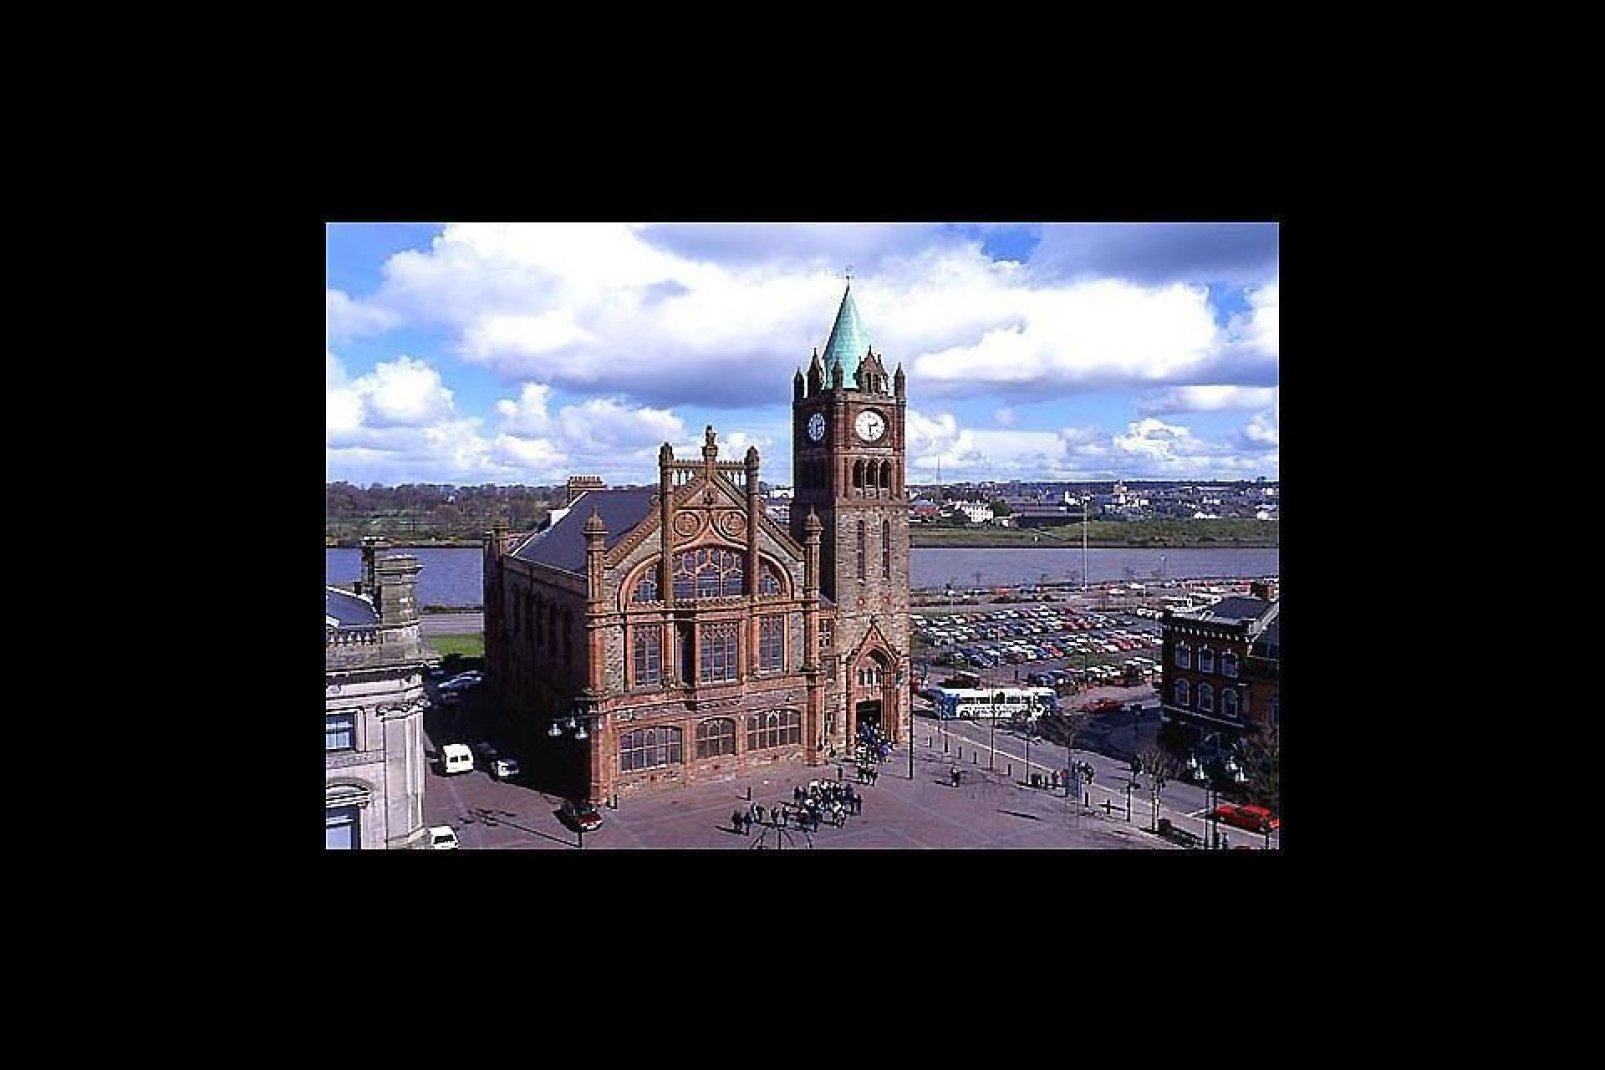 Derry or Londonderry is the second-biggest city in Northern Ireland. The old walled city lies on the west bank of the River Foyle, which is spanned by two bridges